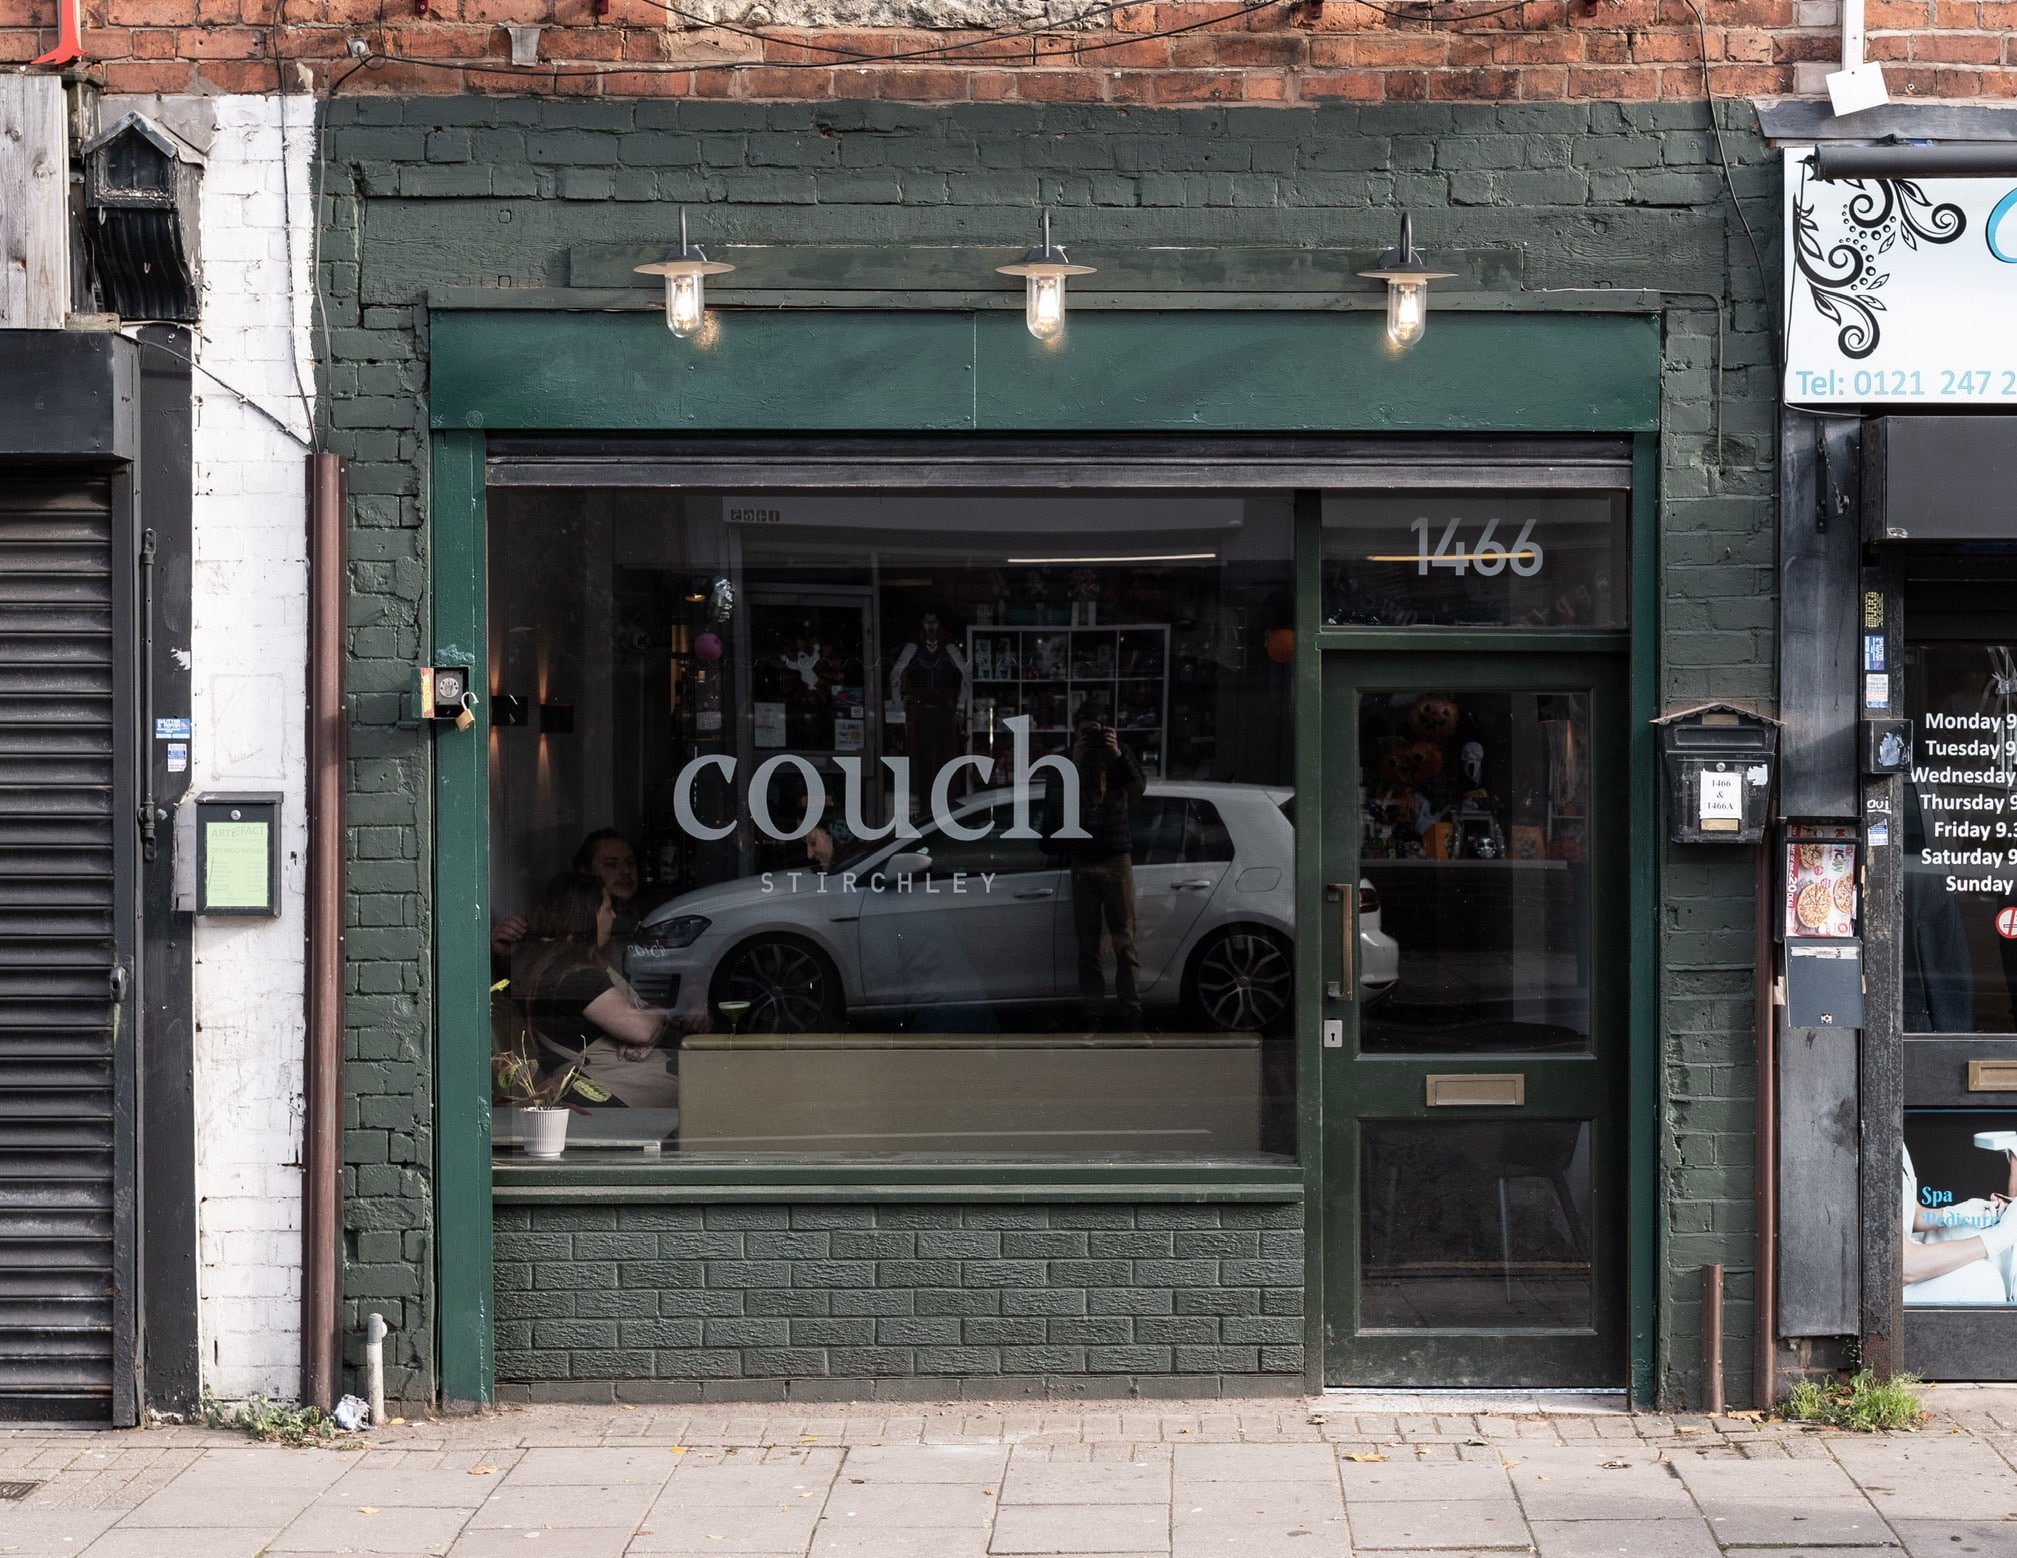 The exterior of the cocktail bar Couch in Strichley